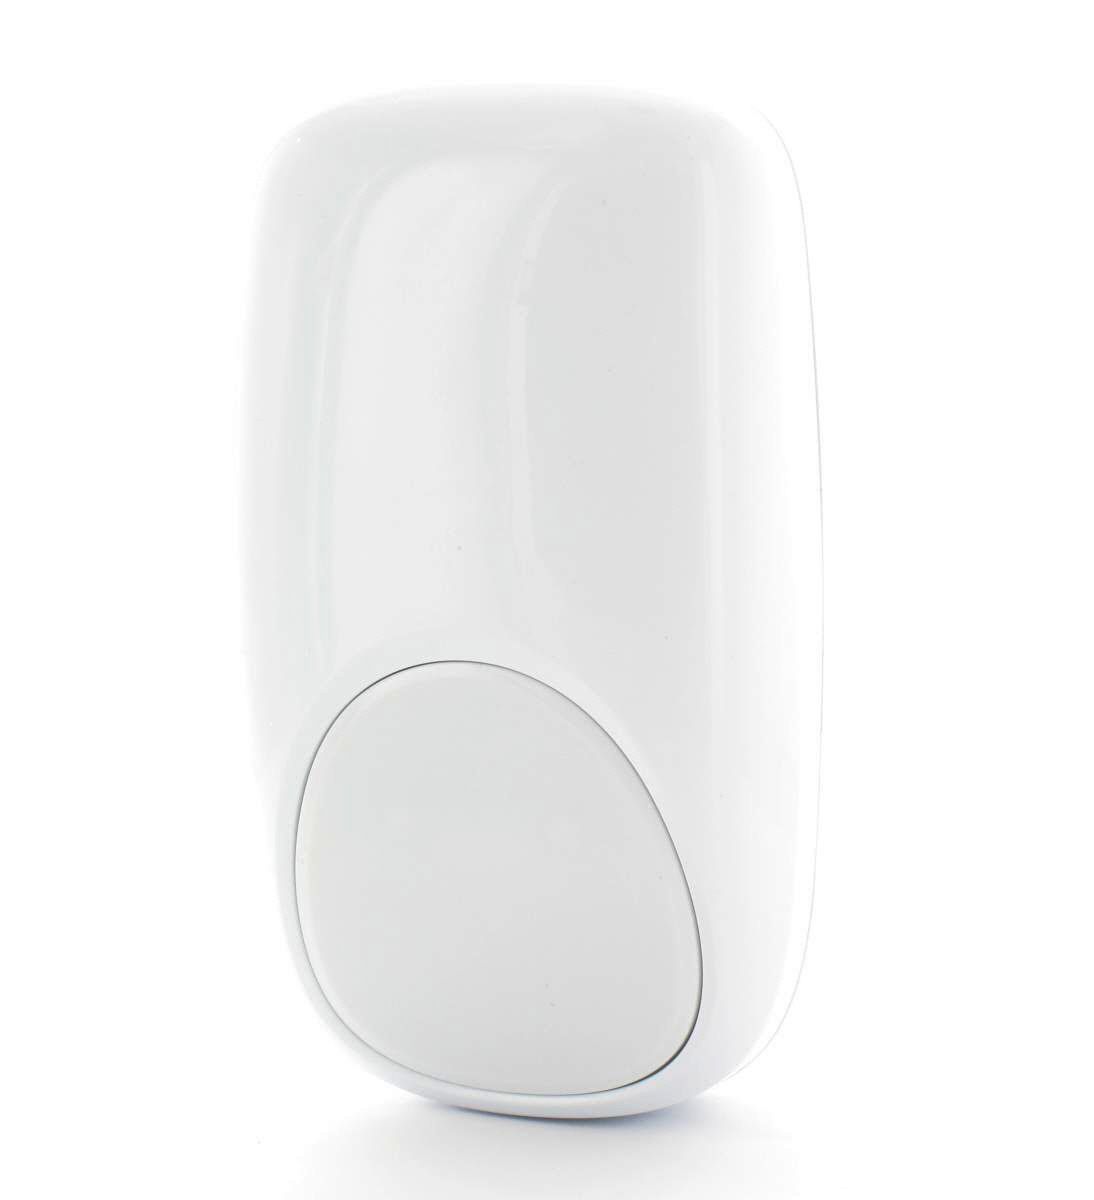 DUAL TEC® Motion Sensor with Anti-Mask, 16 x 22 m range ,EOLresistorsincluded, plug and play design, acive Anti-Mask,EN50131-2-4Grade 3Class II (*). Insert, IMQ (submitted) compliance ,10.525GHz_1